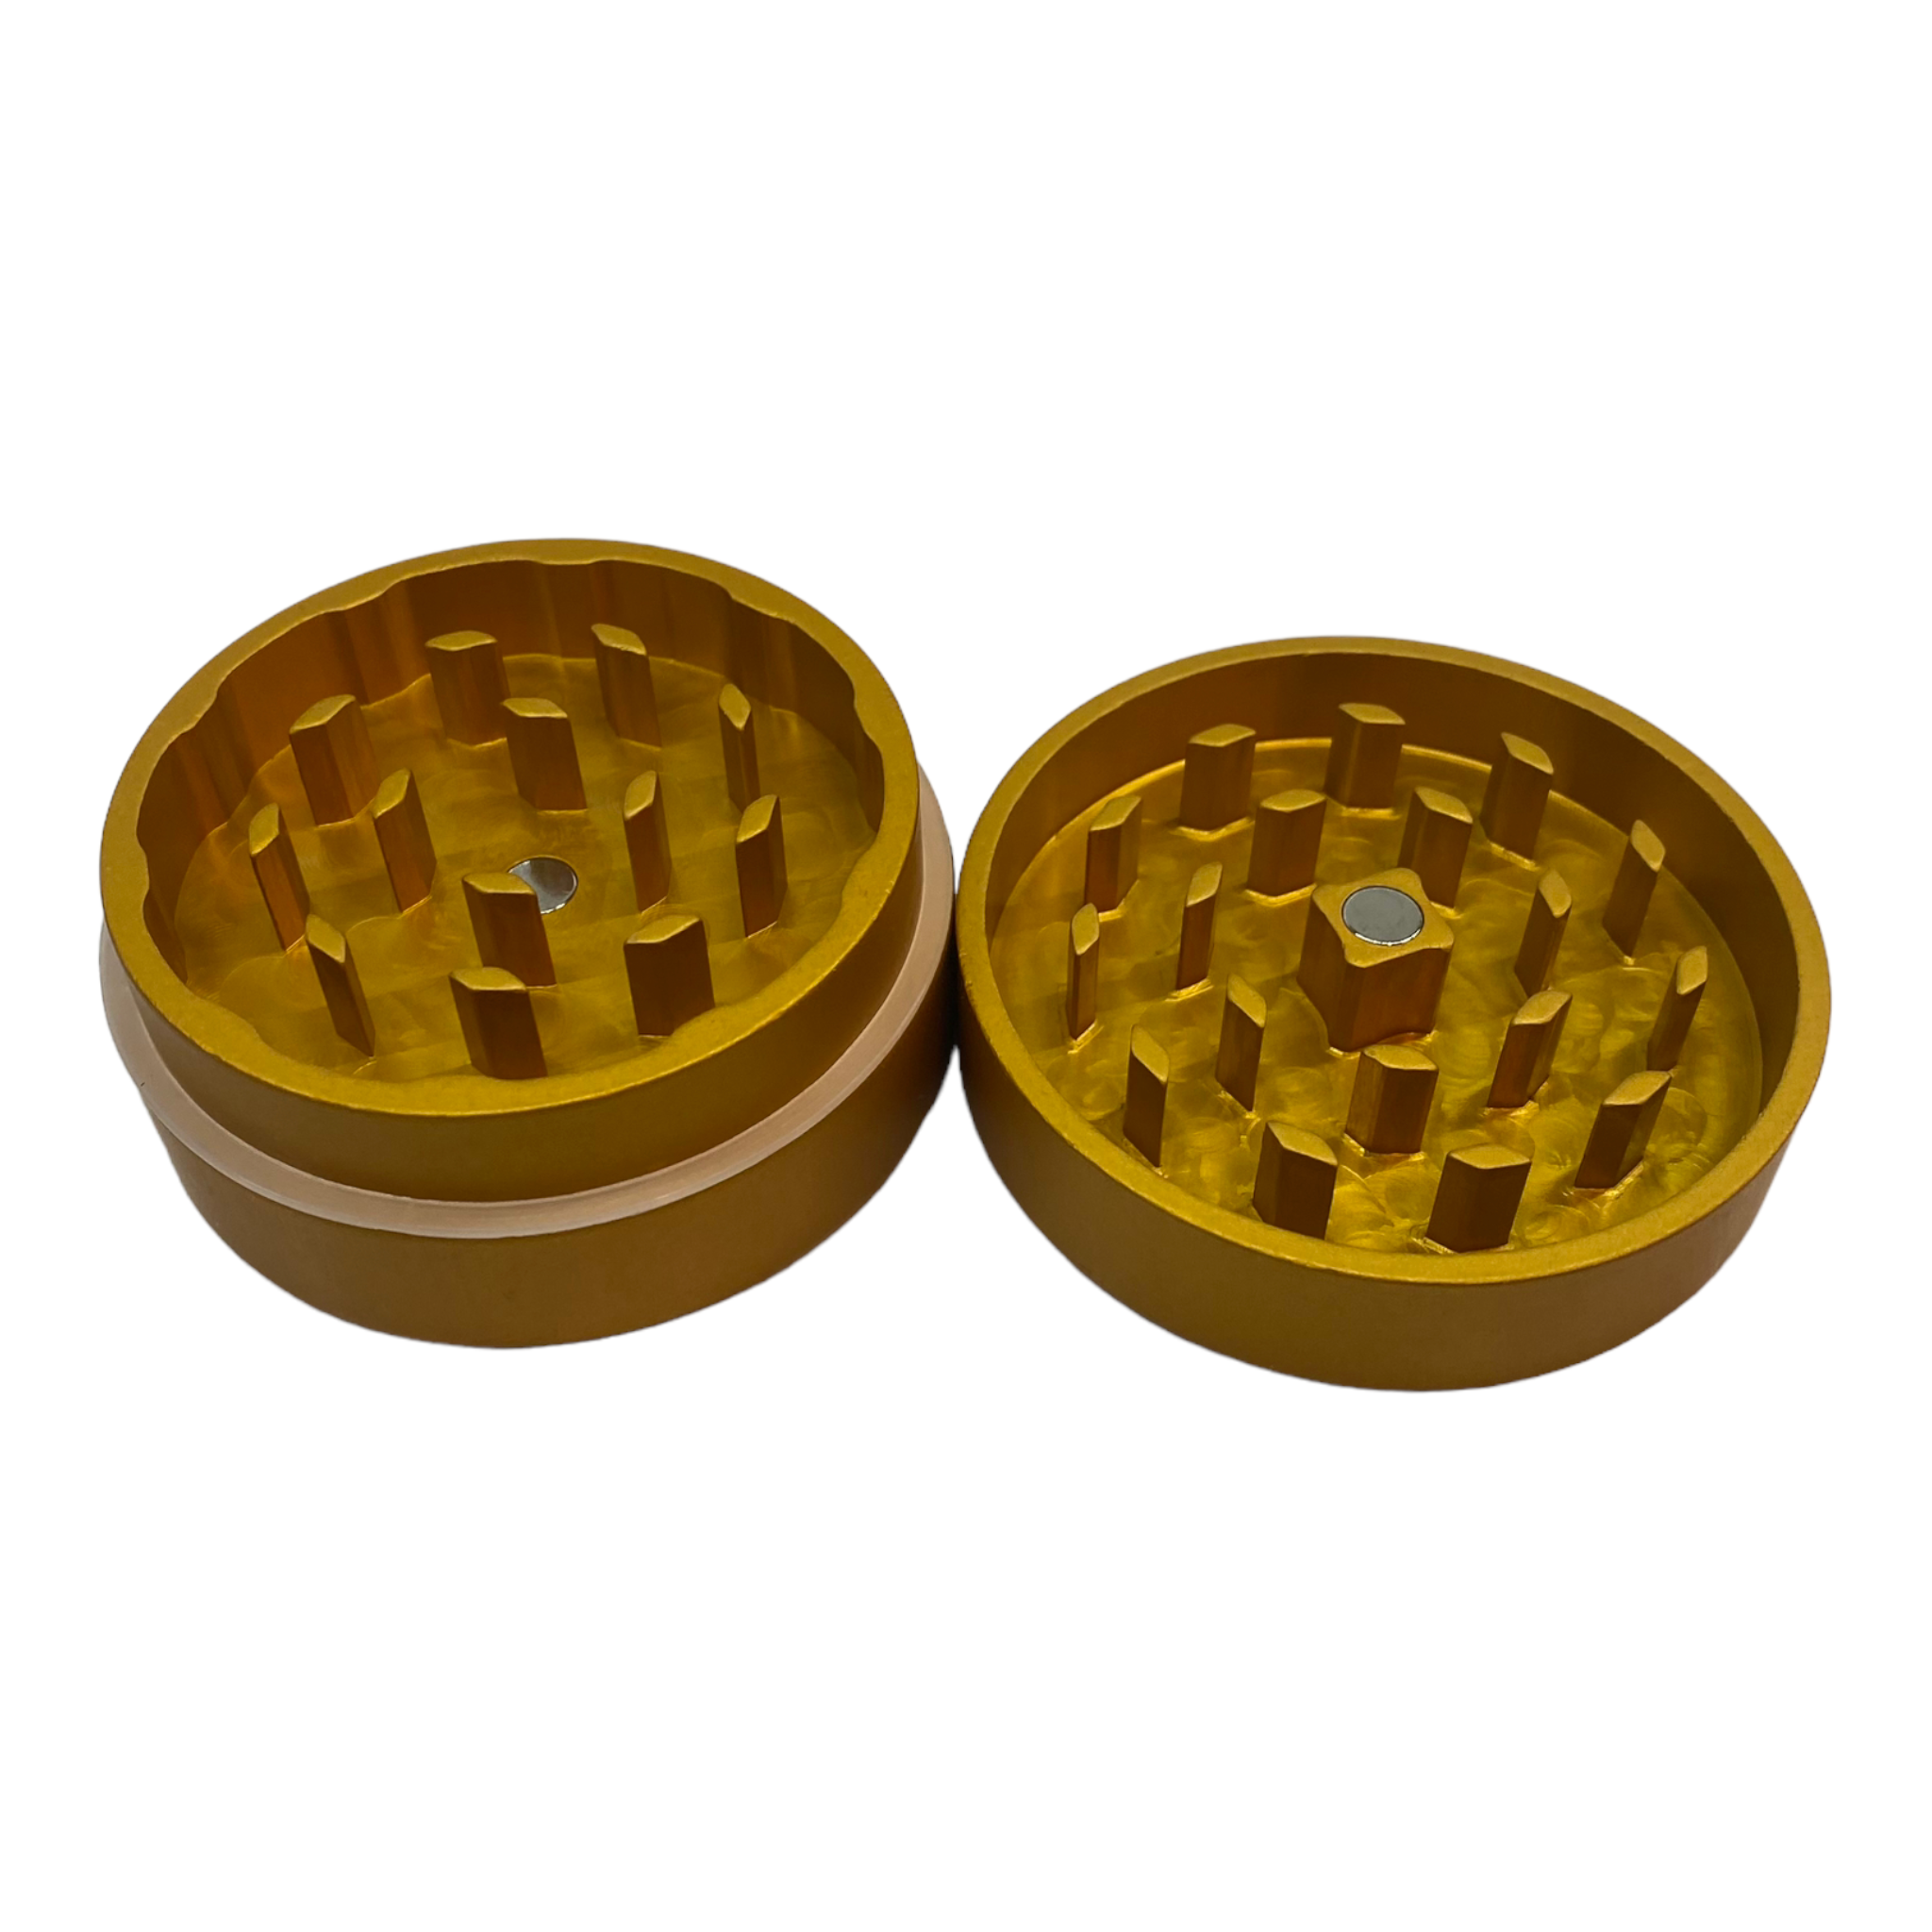 sweet Tahoe Grinders Gold Anodized Aluminum Large Two Piece Herb Grinder With Cordycep Mushrooms